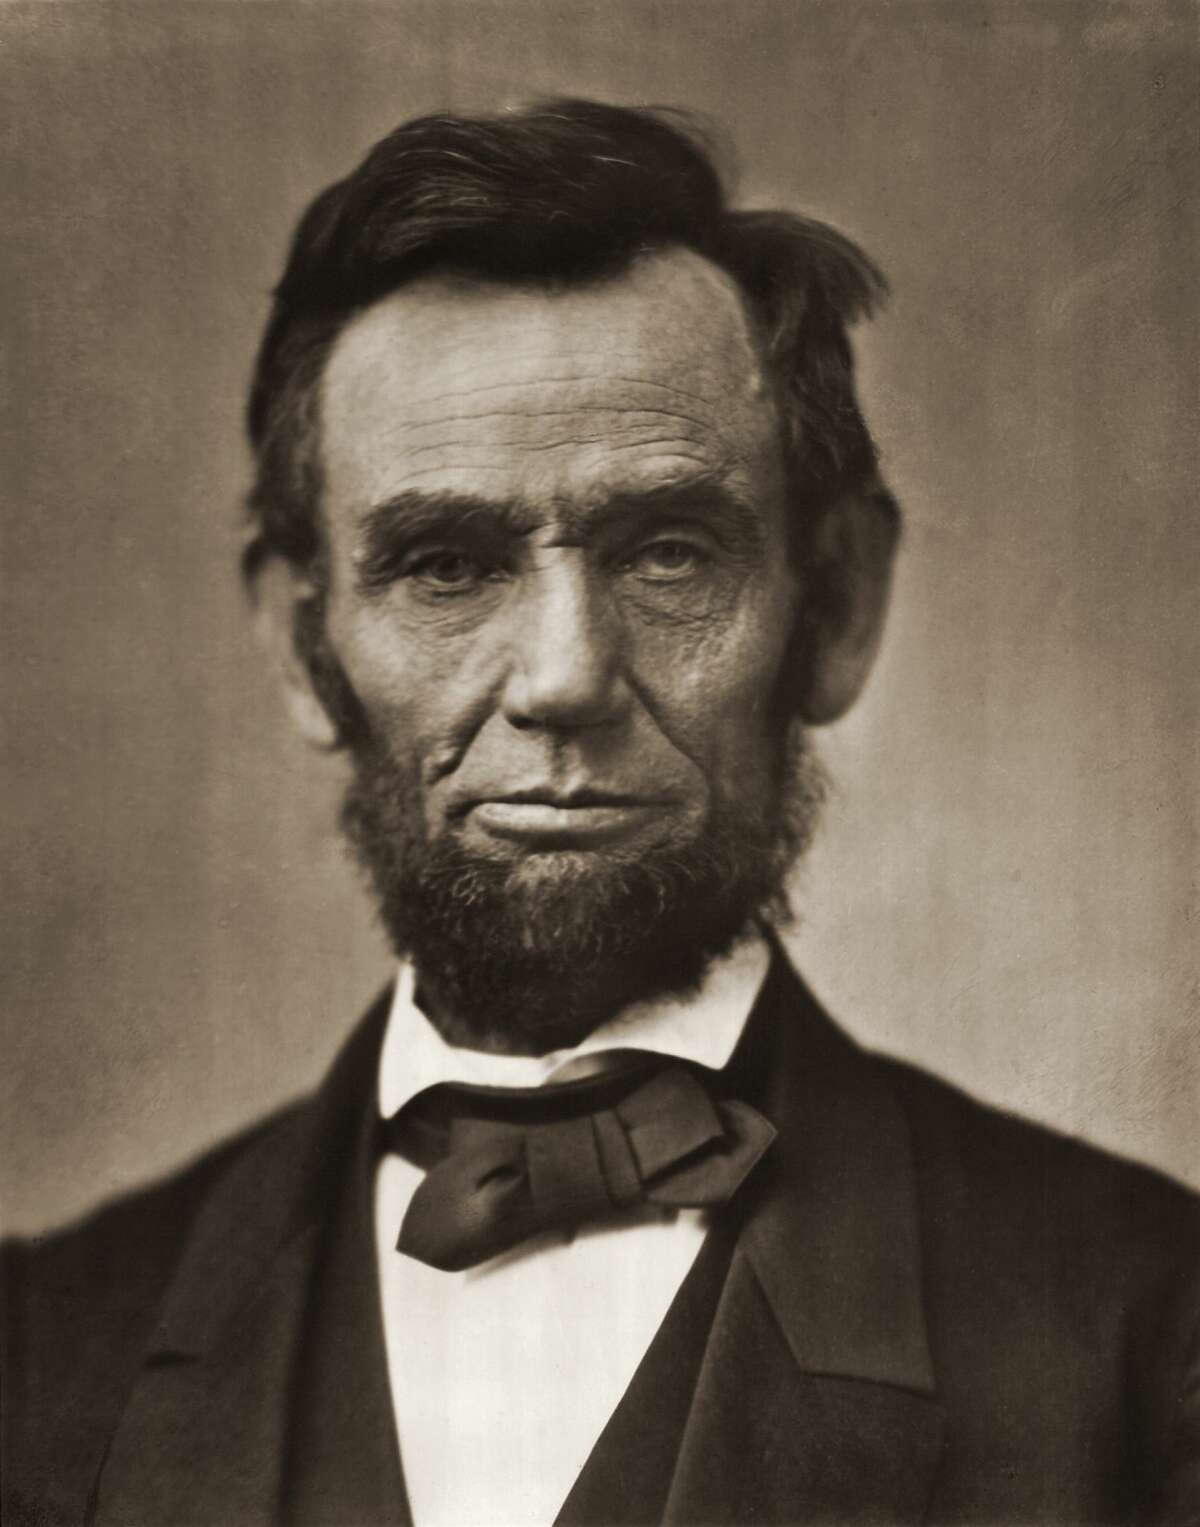 On April 15, 1865: Abraham Lincoln, the 16th President of the United States, was assassinated.